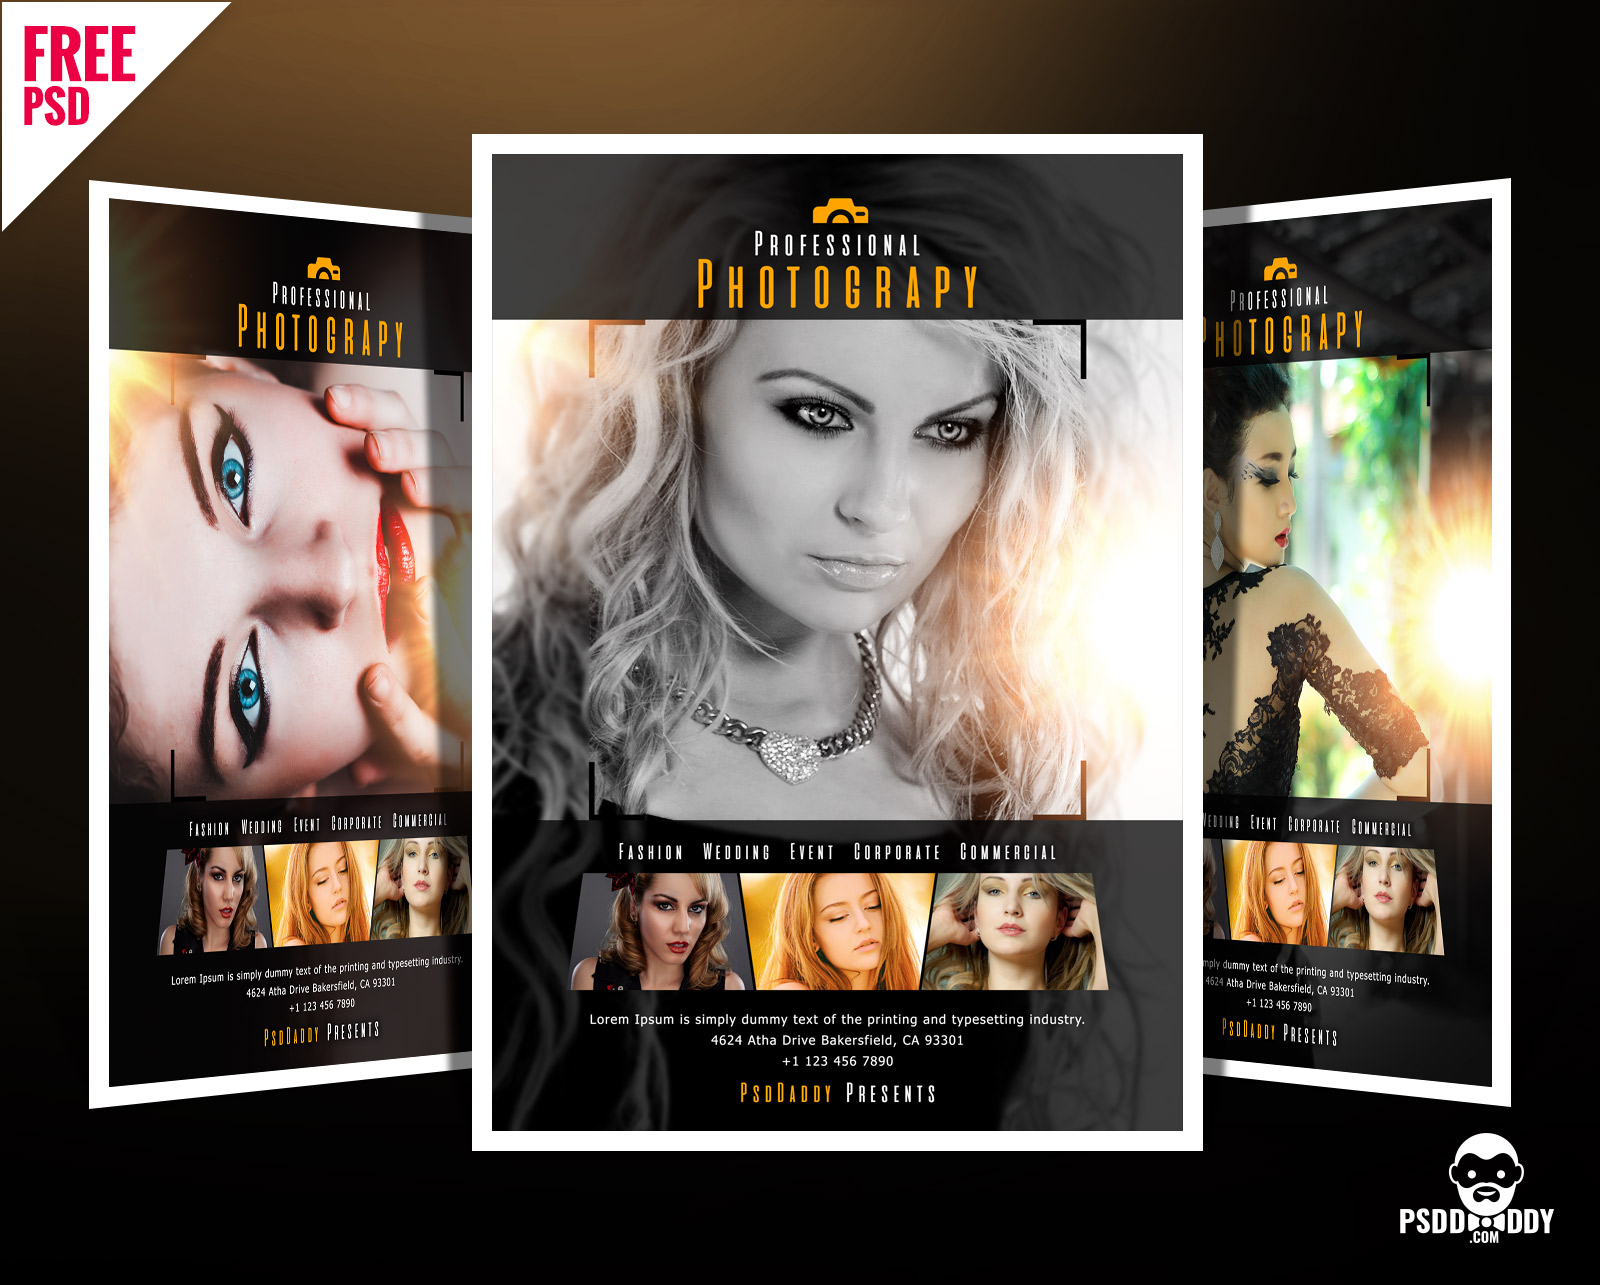 Download]Professional Photography Flyer PSD  PsdDaddy.com In Free Photography Flyer Templates Psd